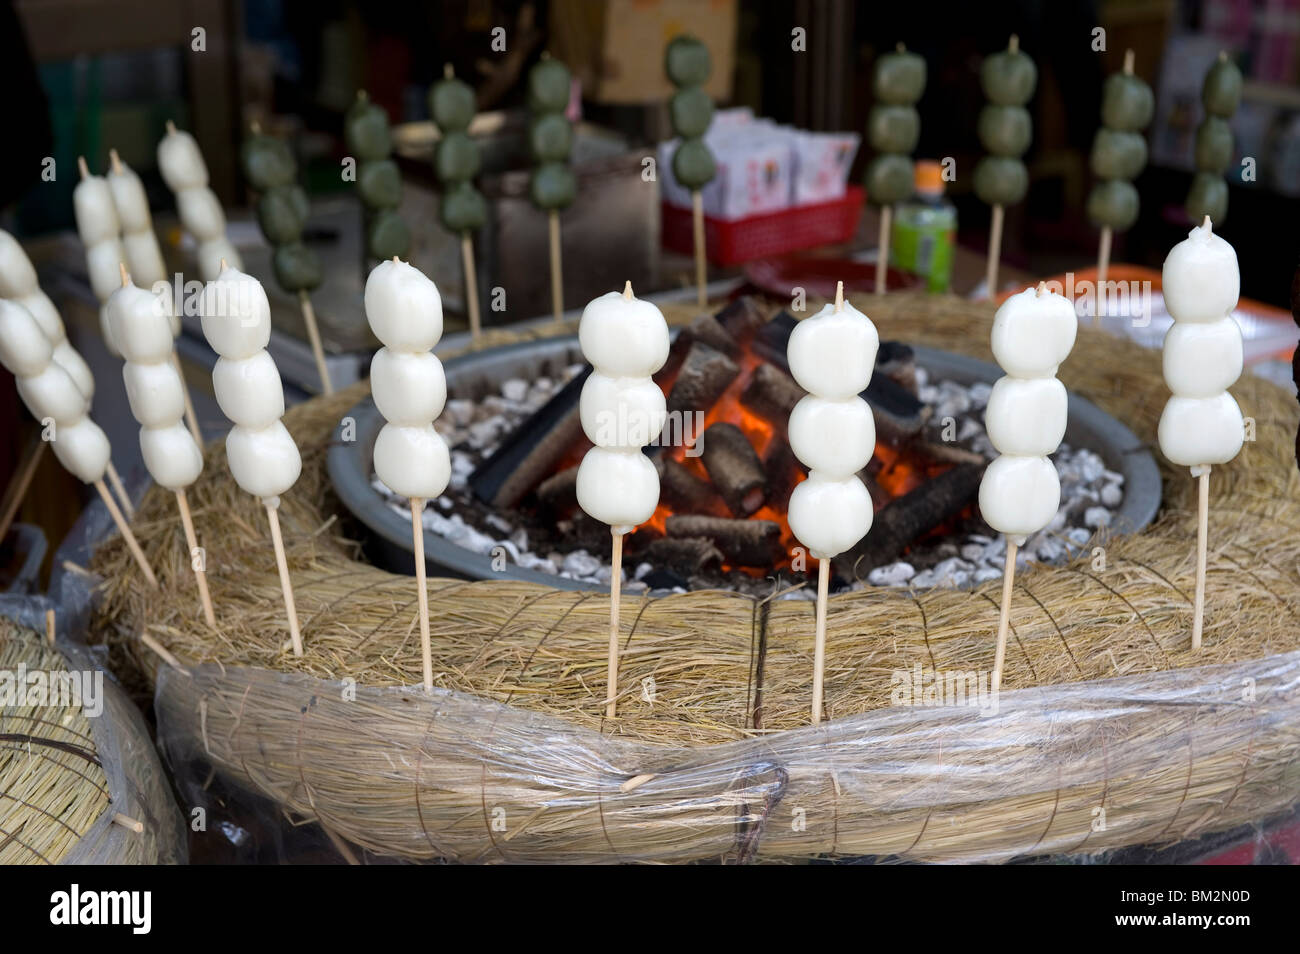 Japanese snack called dango (three sticky rice cake balls on a skewer) warming beside hot coals, Japan Stock Photo